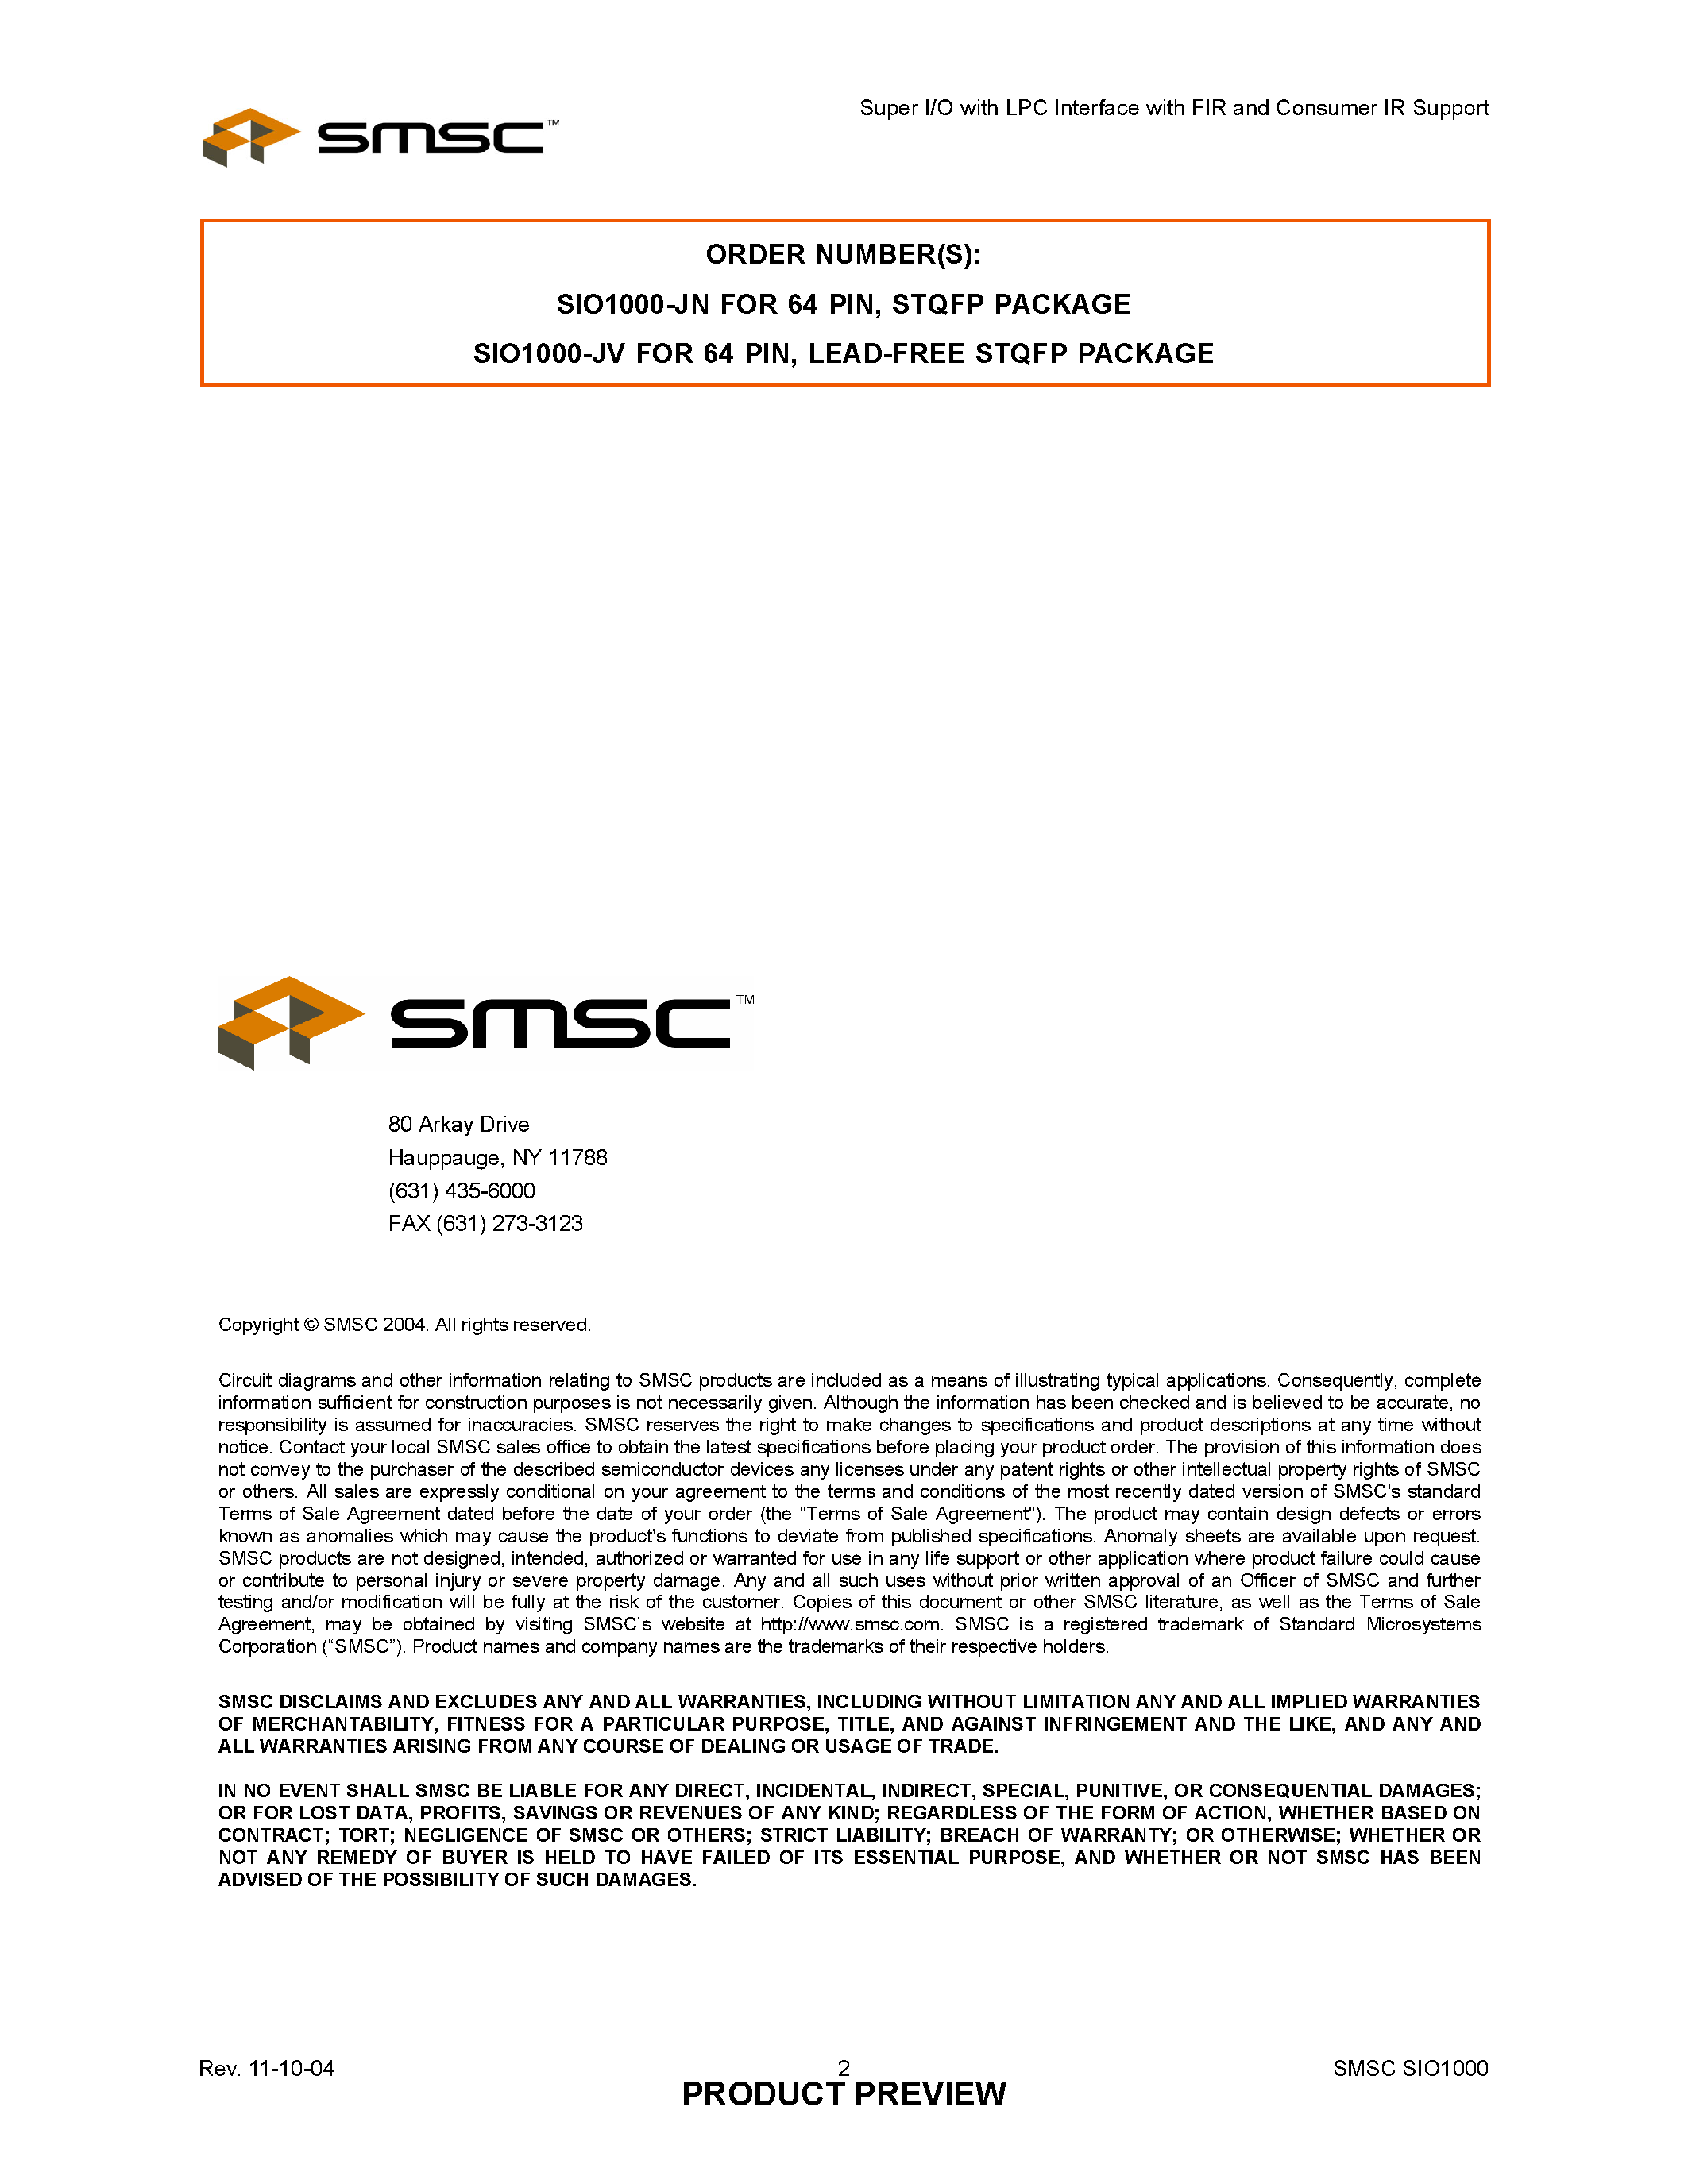 Datasheet SIO1000-JV - SUPER I/O WITH LPC INTERFACE WITH FIR AND CONSUMER IR SUPPORT page 2